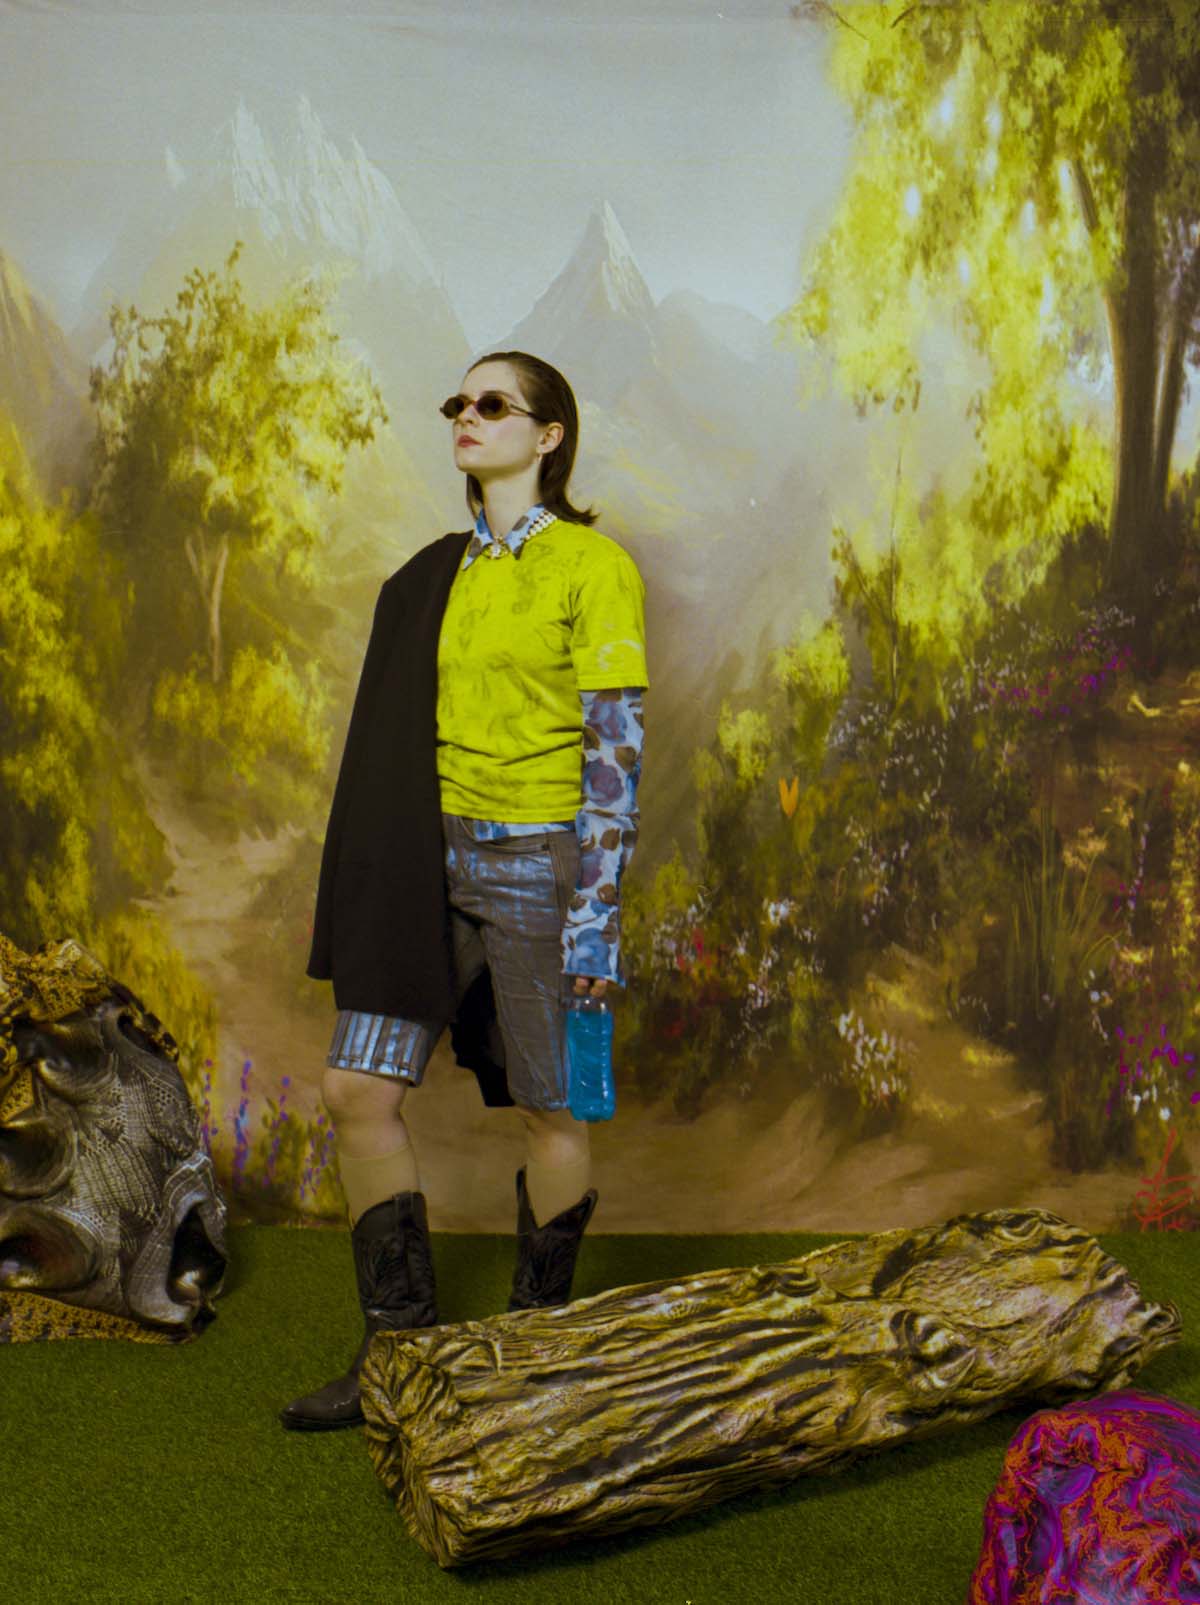 Fuffifufzich stands upright with cowboy boots, short blue-brown trousers, a long-sleeved shirt in the same colours over which she wears a yellow T-shirt, and a black coverlet over her right shoulder in a backdrop in which, among other things, a prop tree trunk lies. The background is a painting showing a landscape with snow-covered mountains, trees, a path and grasses. She is also wearing sunglasses, has her shoulder-length brown hair slicked back and is looking out of the picture to the left.